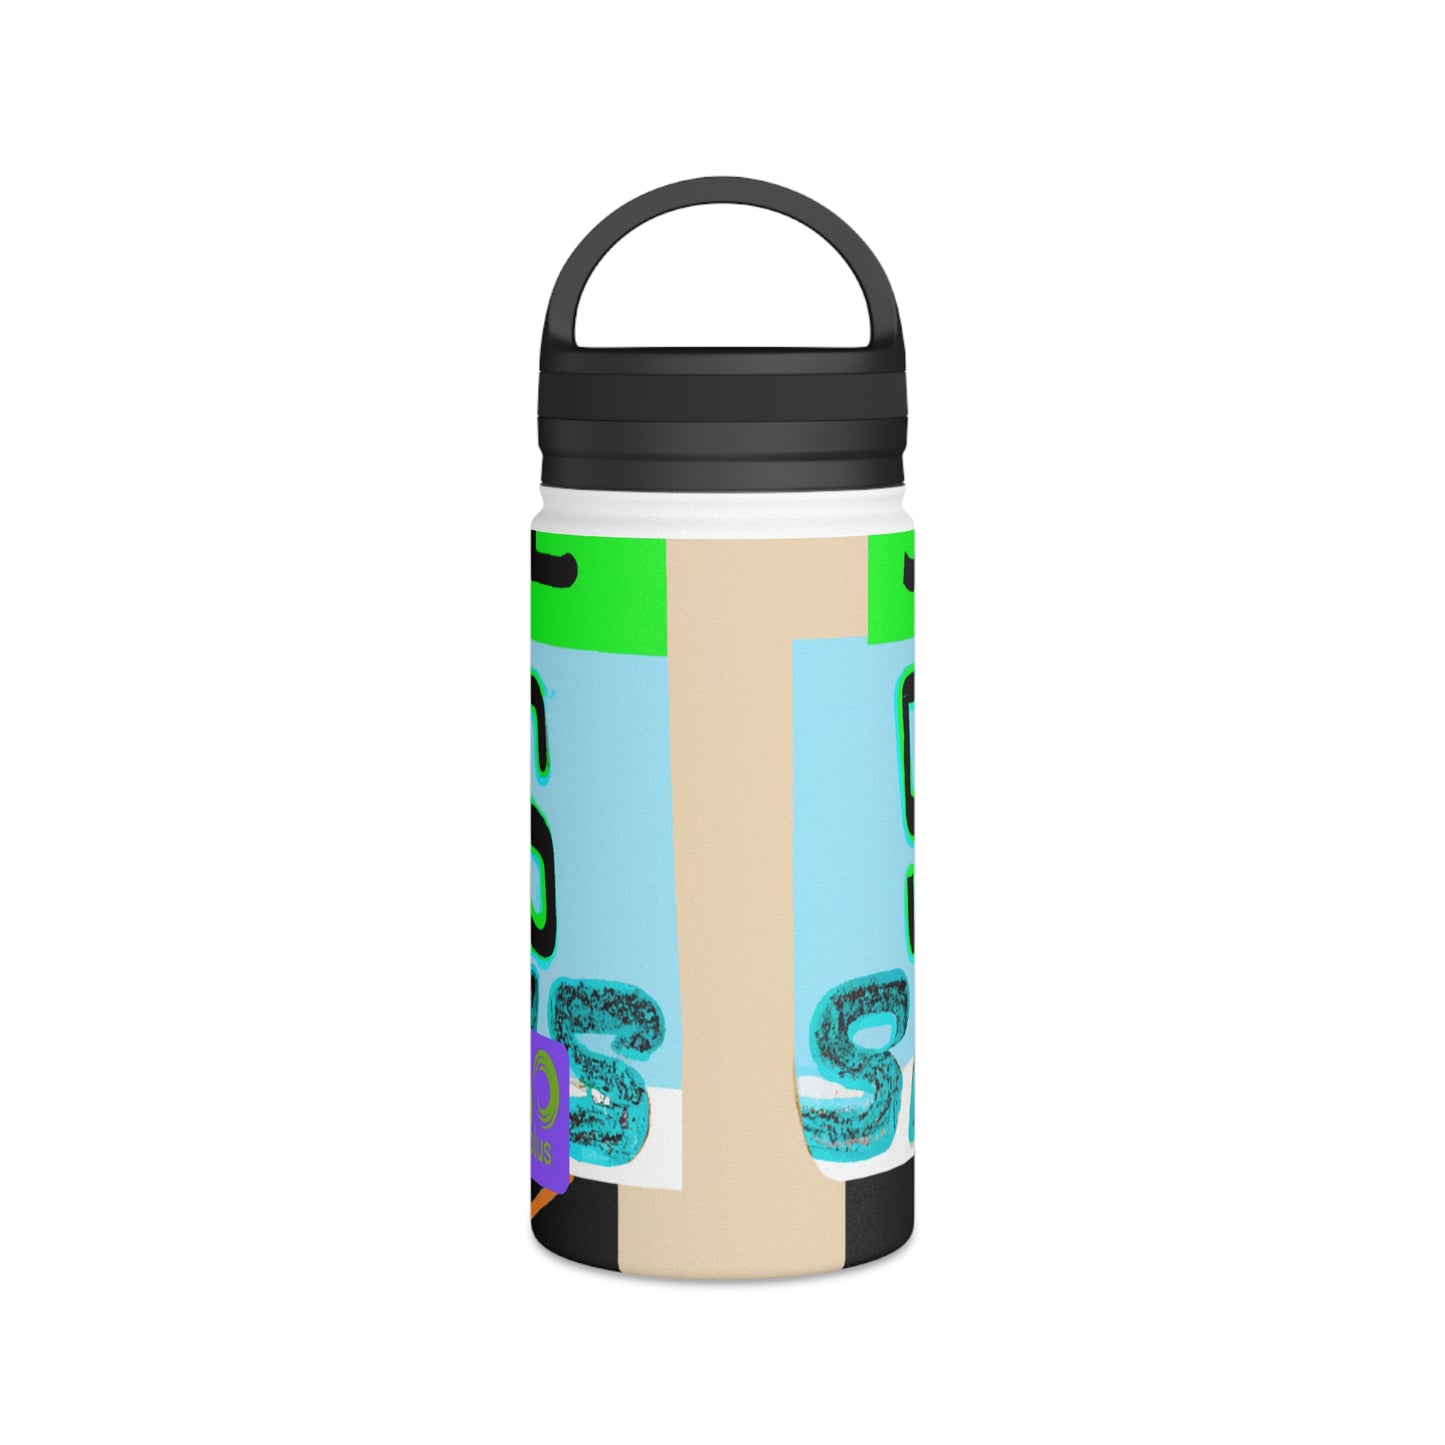 "Athletic Artistry: An Unexpected Tribute to [Athlete's Name]" - Go Plus Stainless Steel Water Bottle, Handle Lid